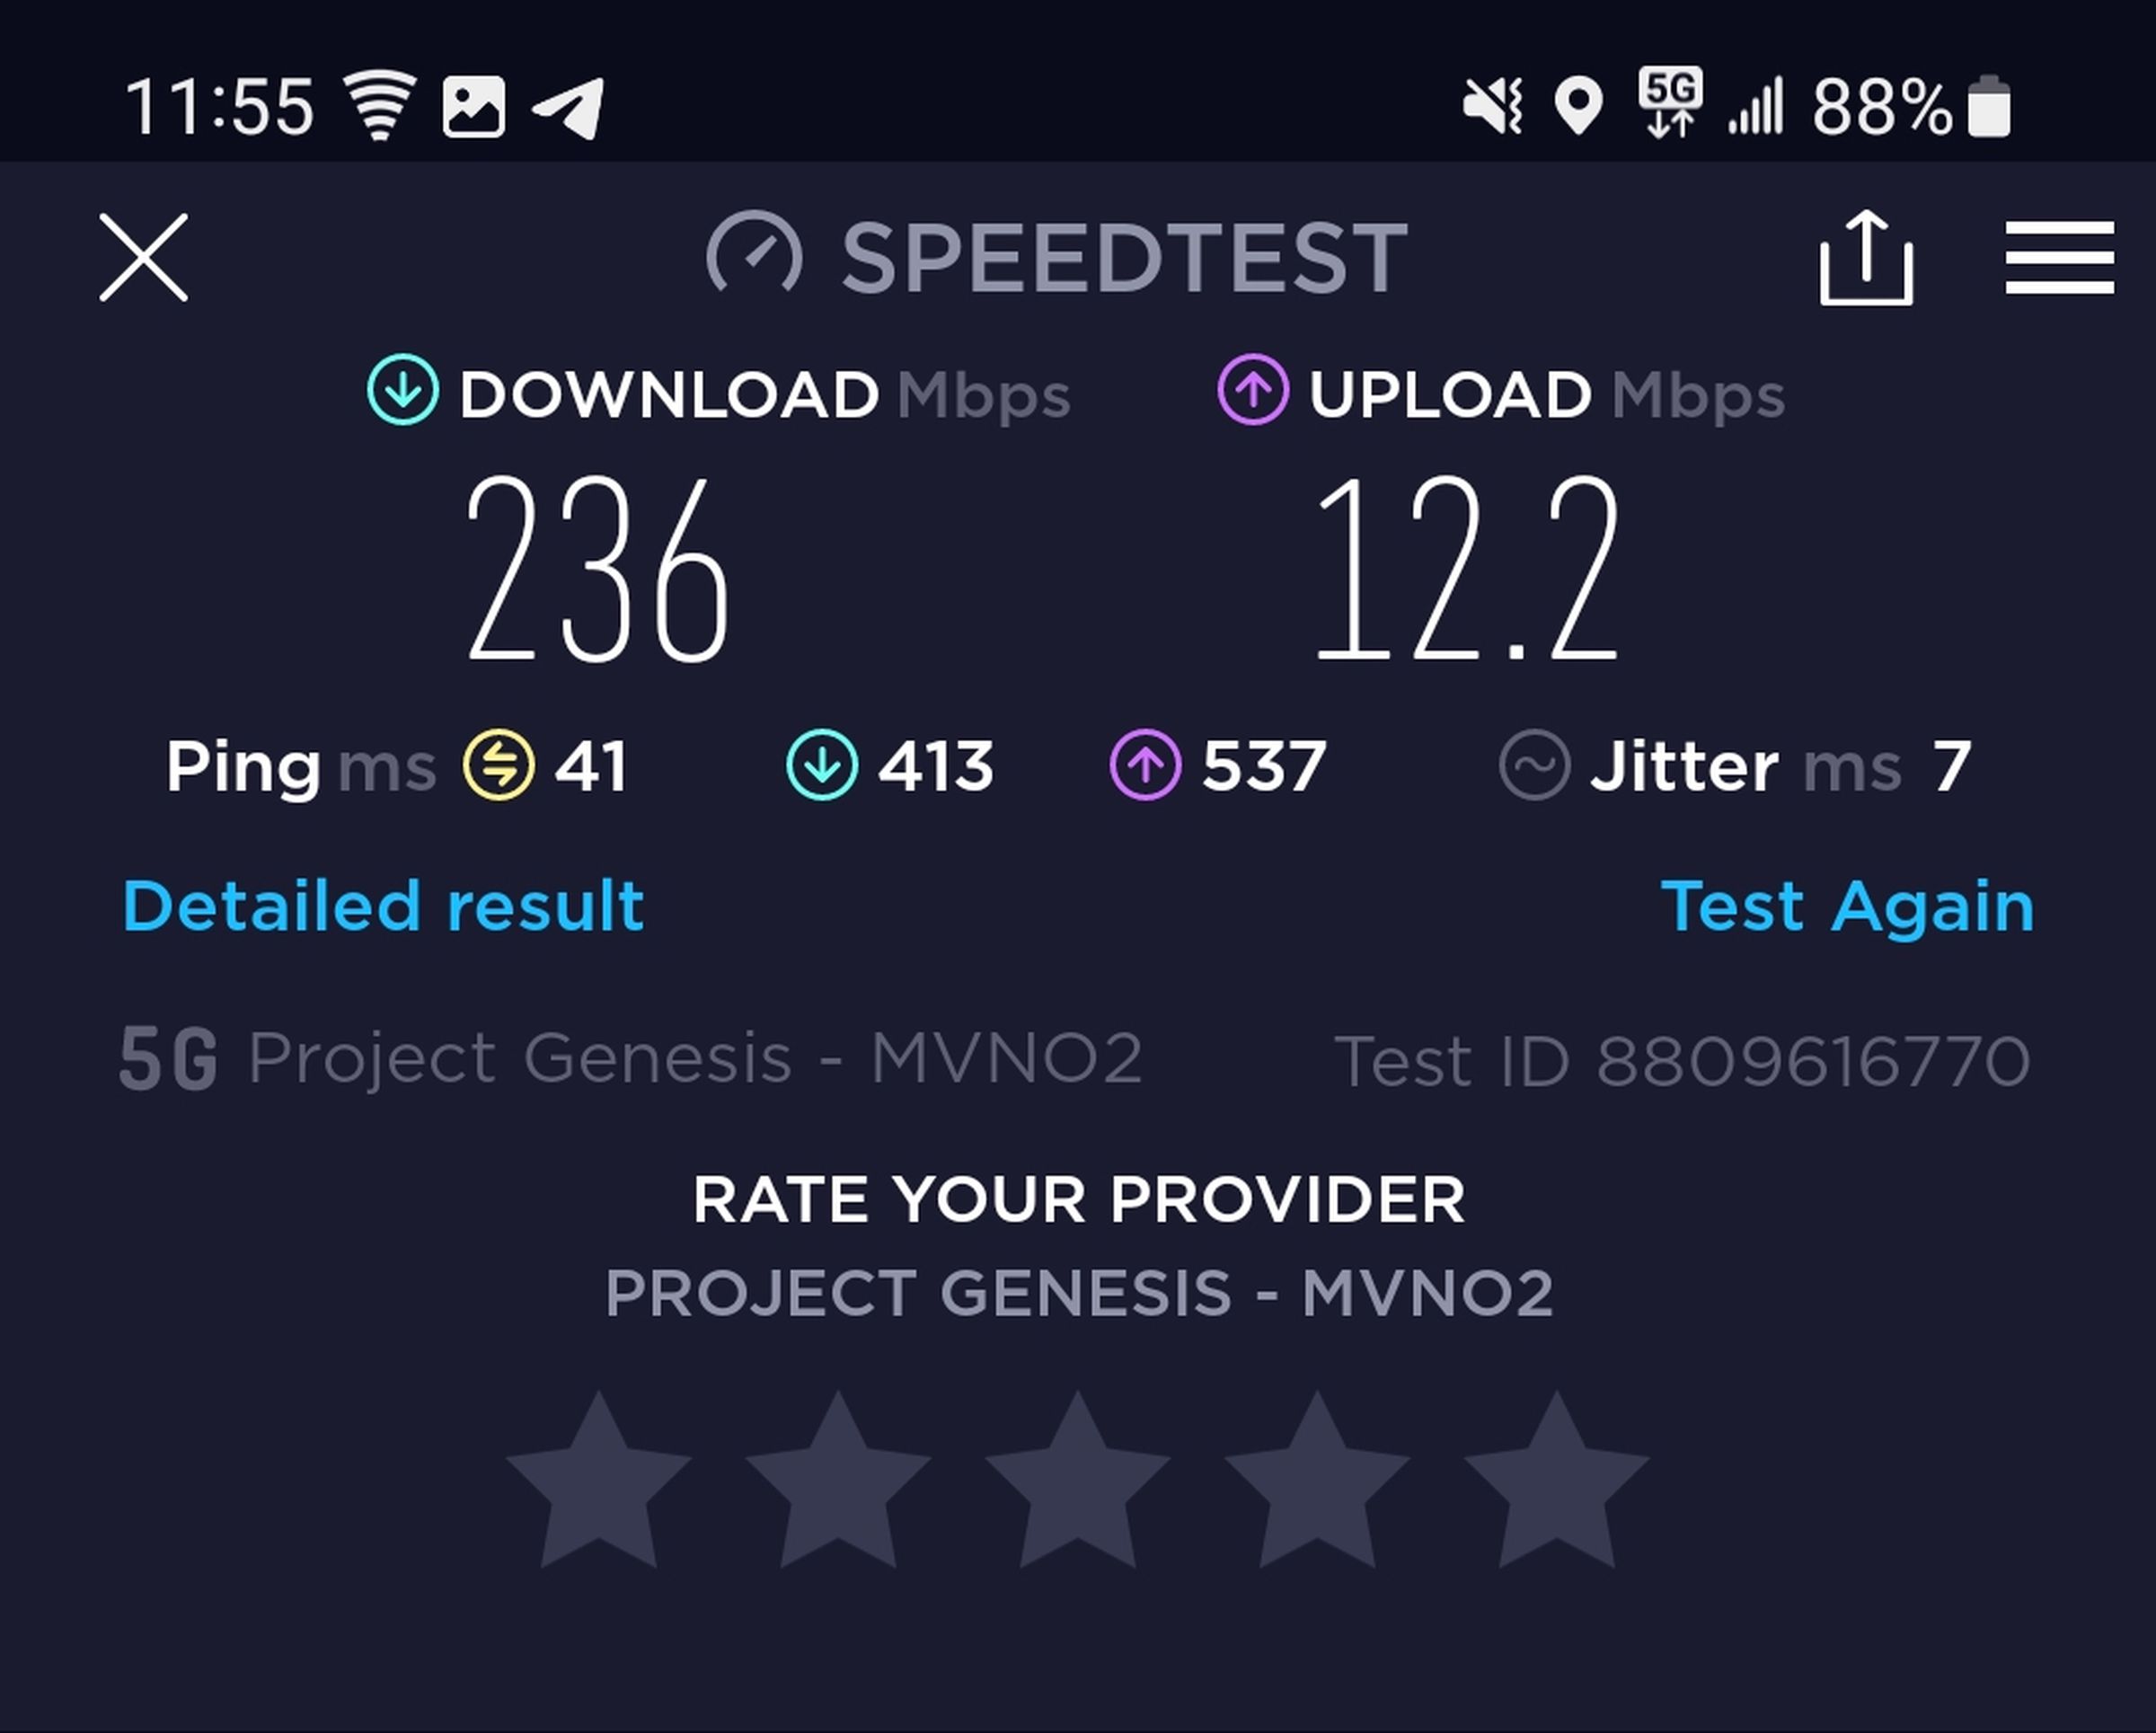 A screenshot of a speed test result showing a download speed of 236 Mbps and an upload speed of 12.2 Mbps.